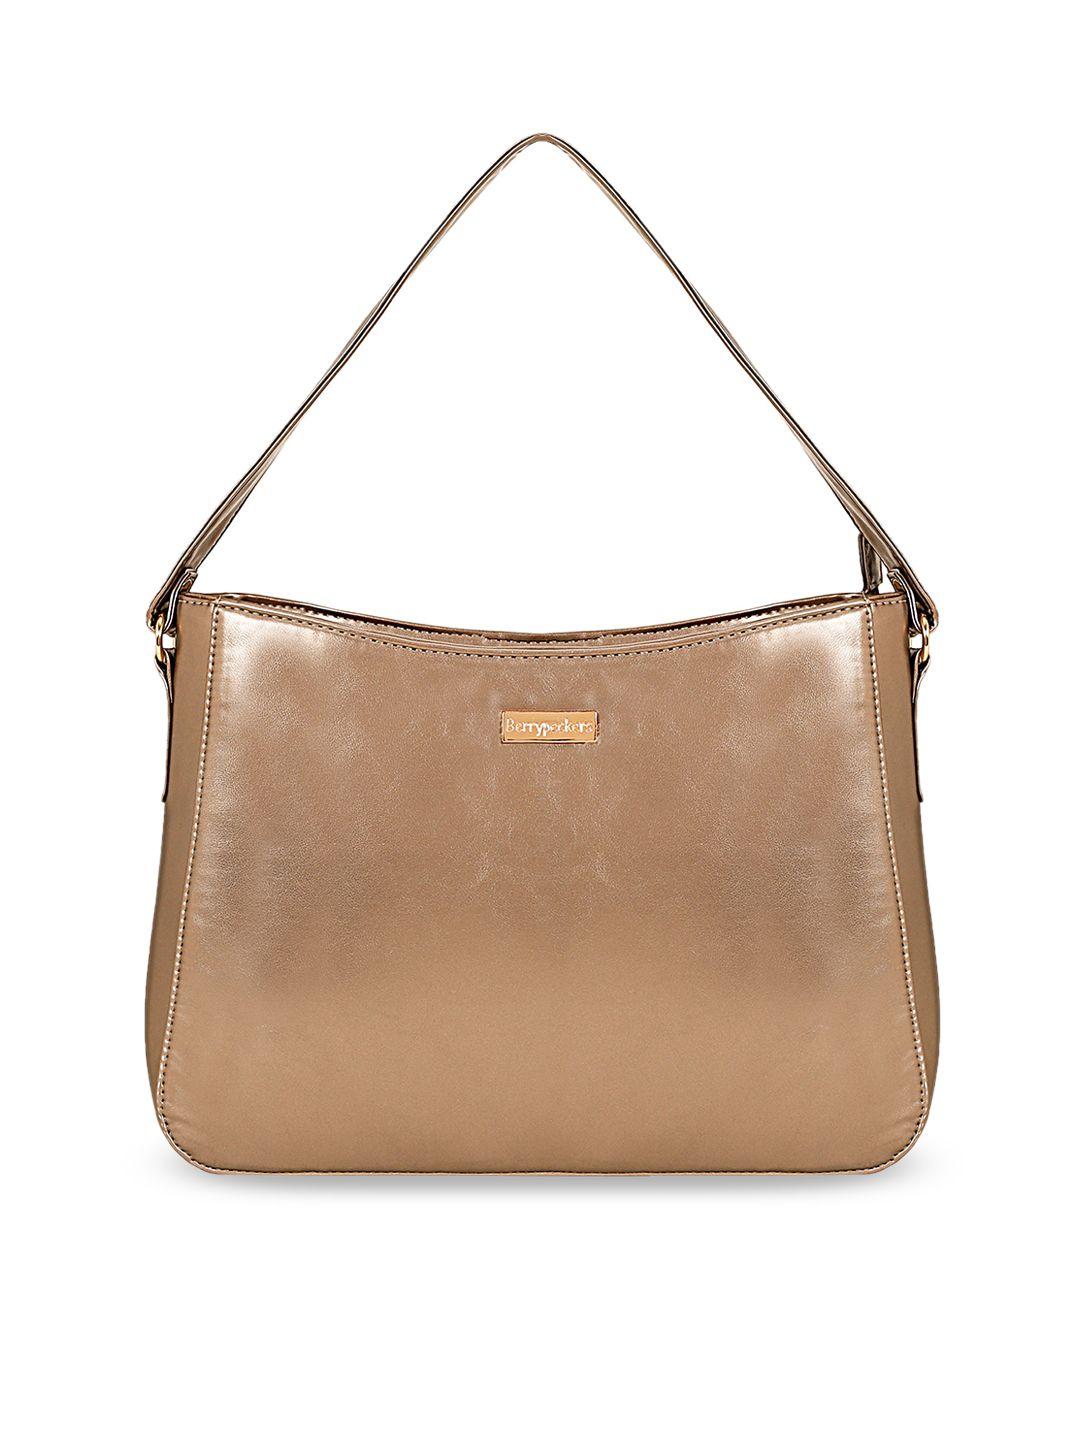 berrypeckers small structured shoulder bag